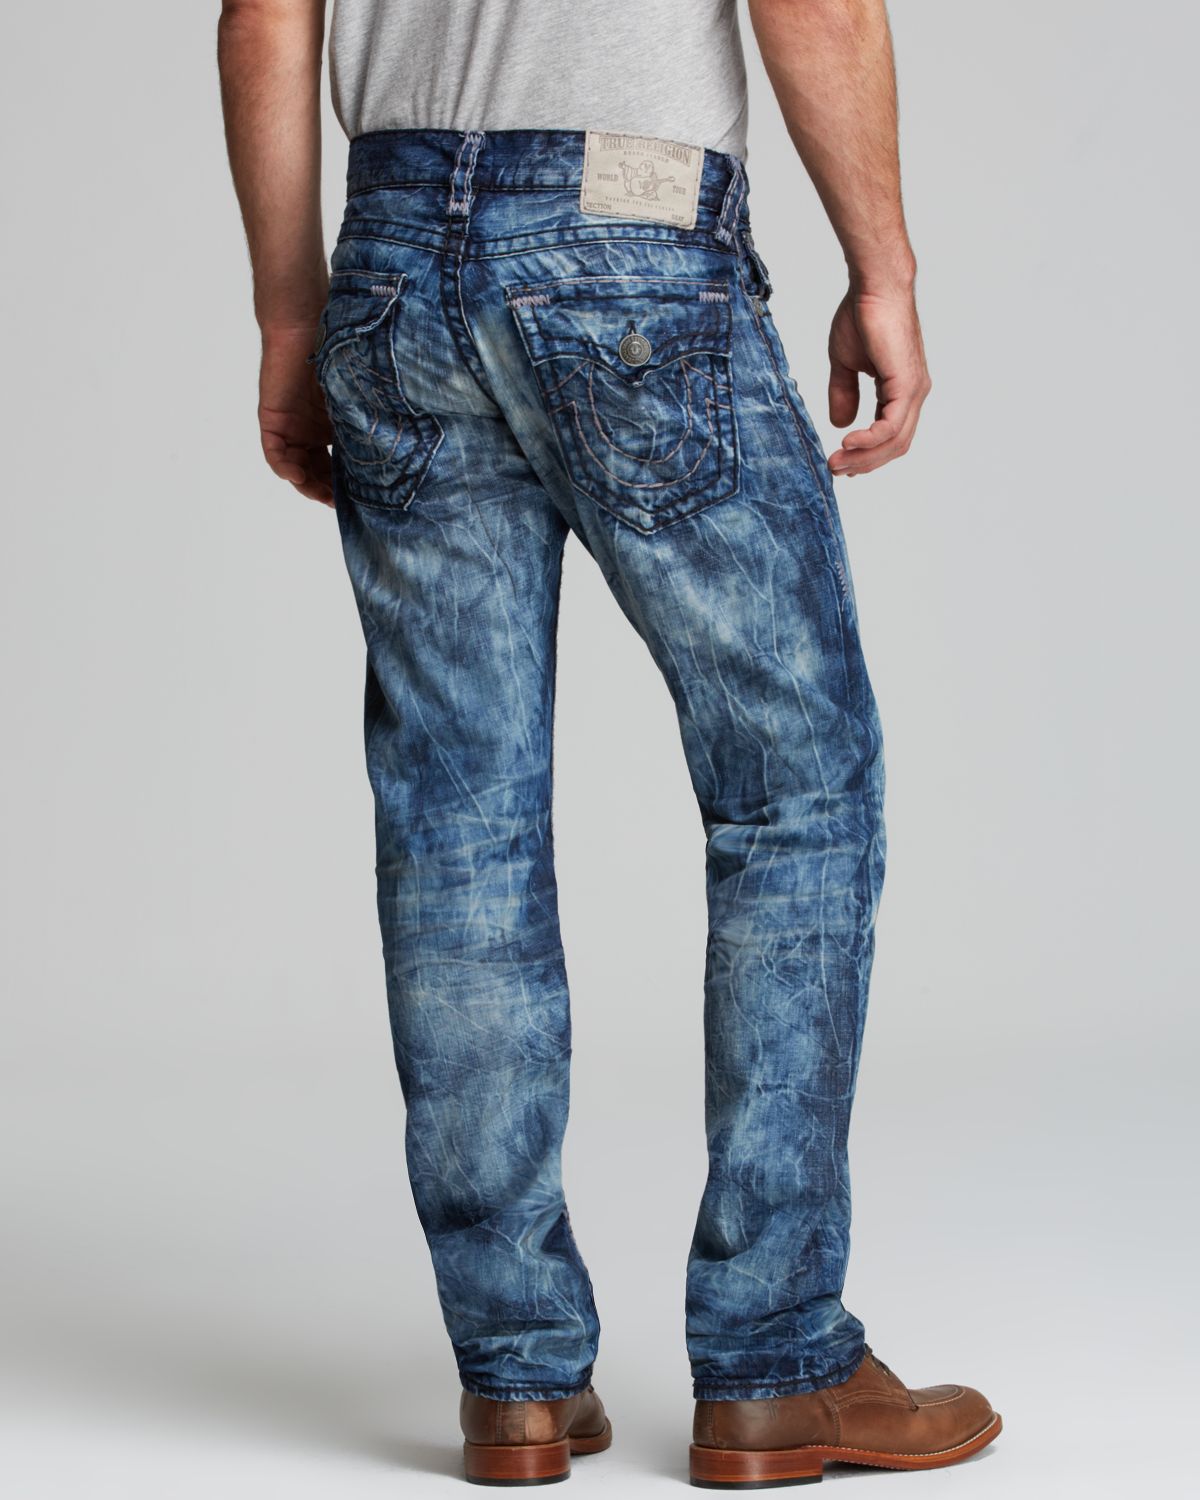 True religion Jeans Ricky Super T Straight Fit in Foster City in Blue ...